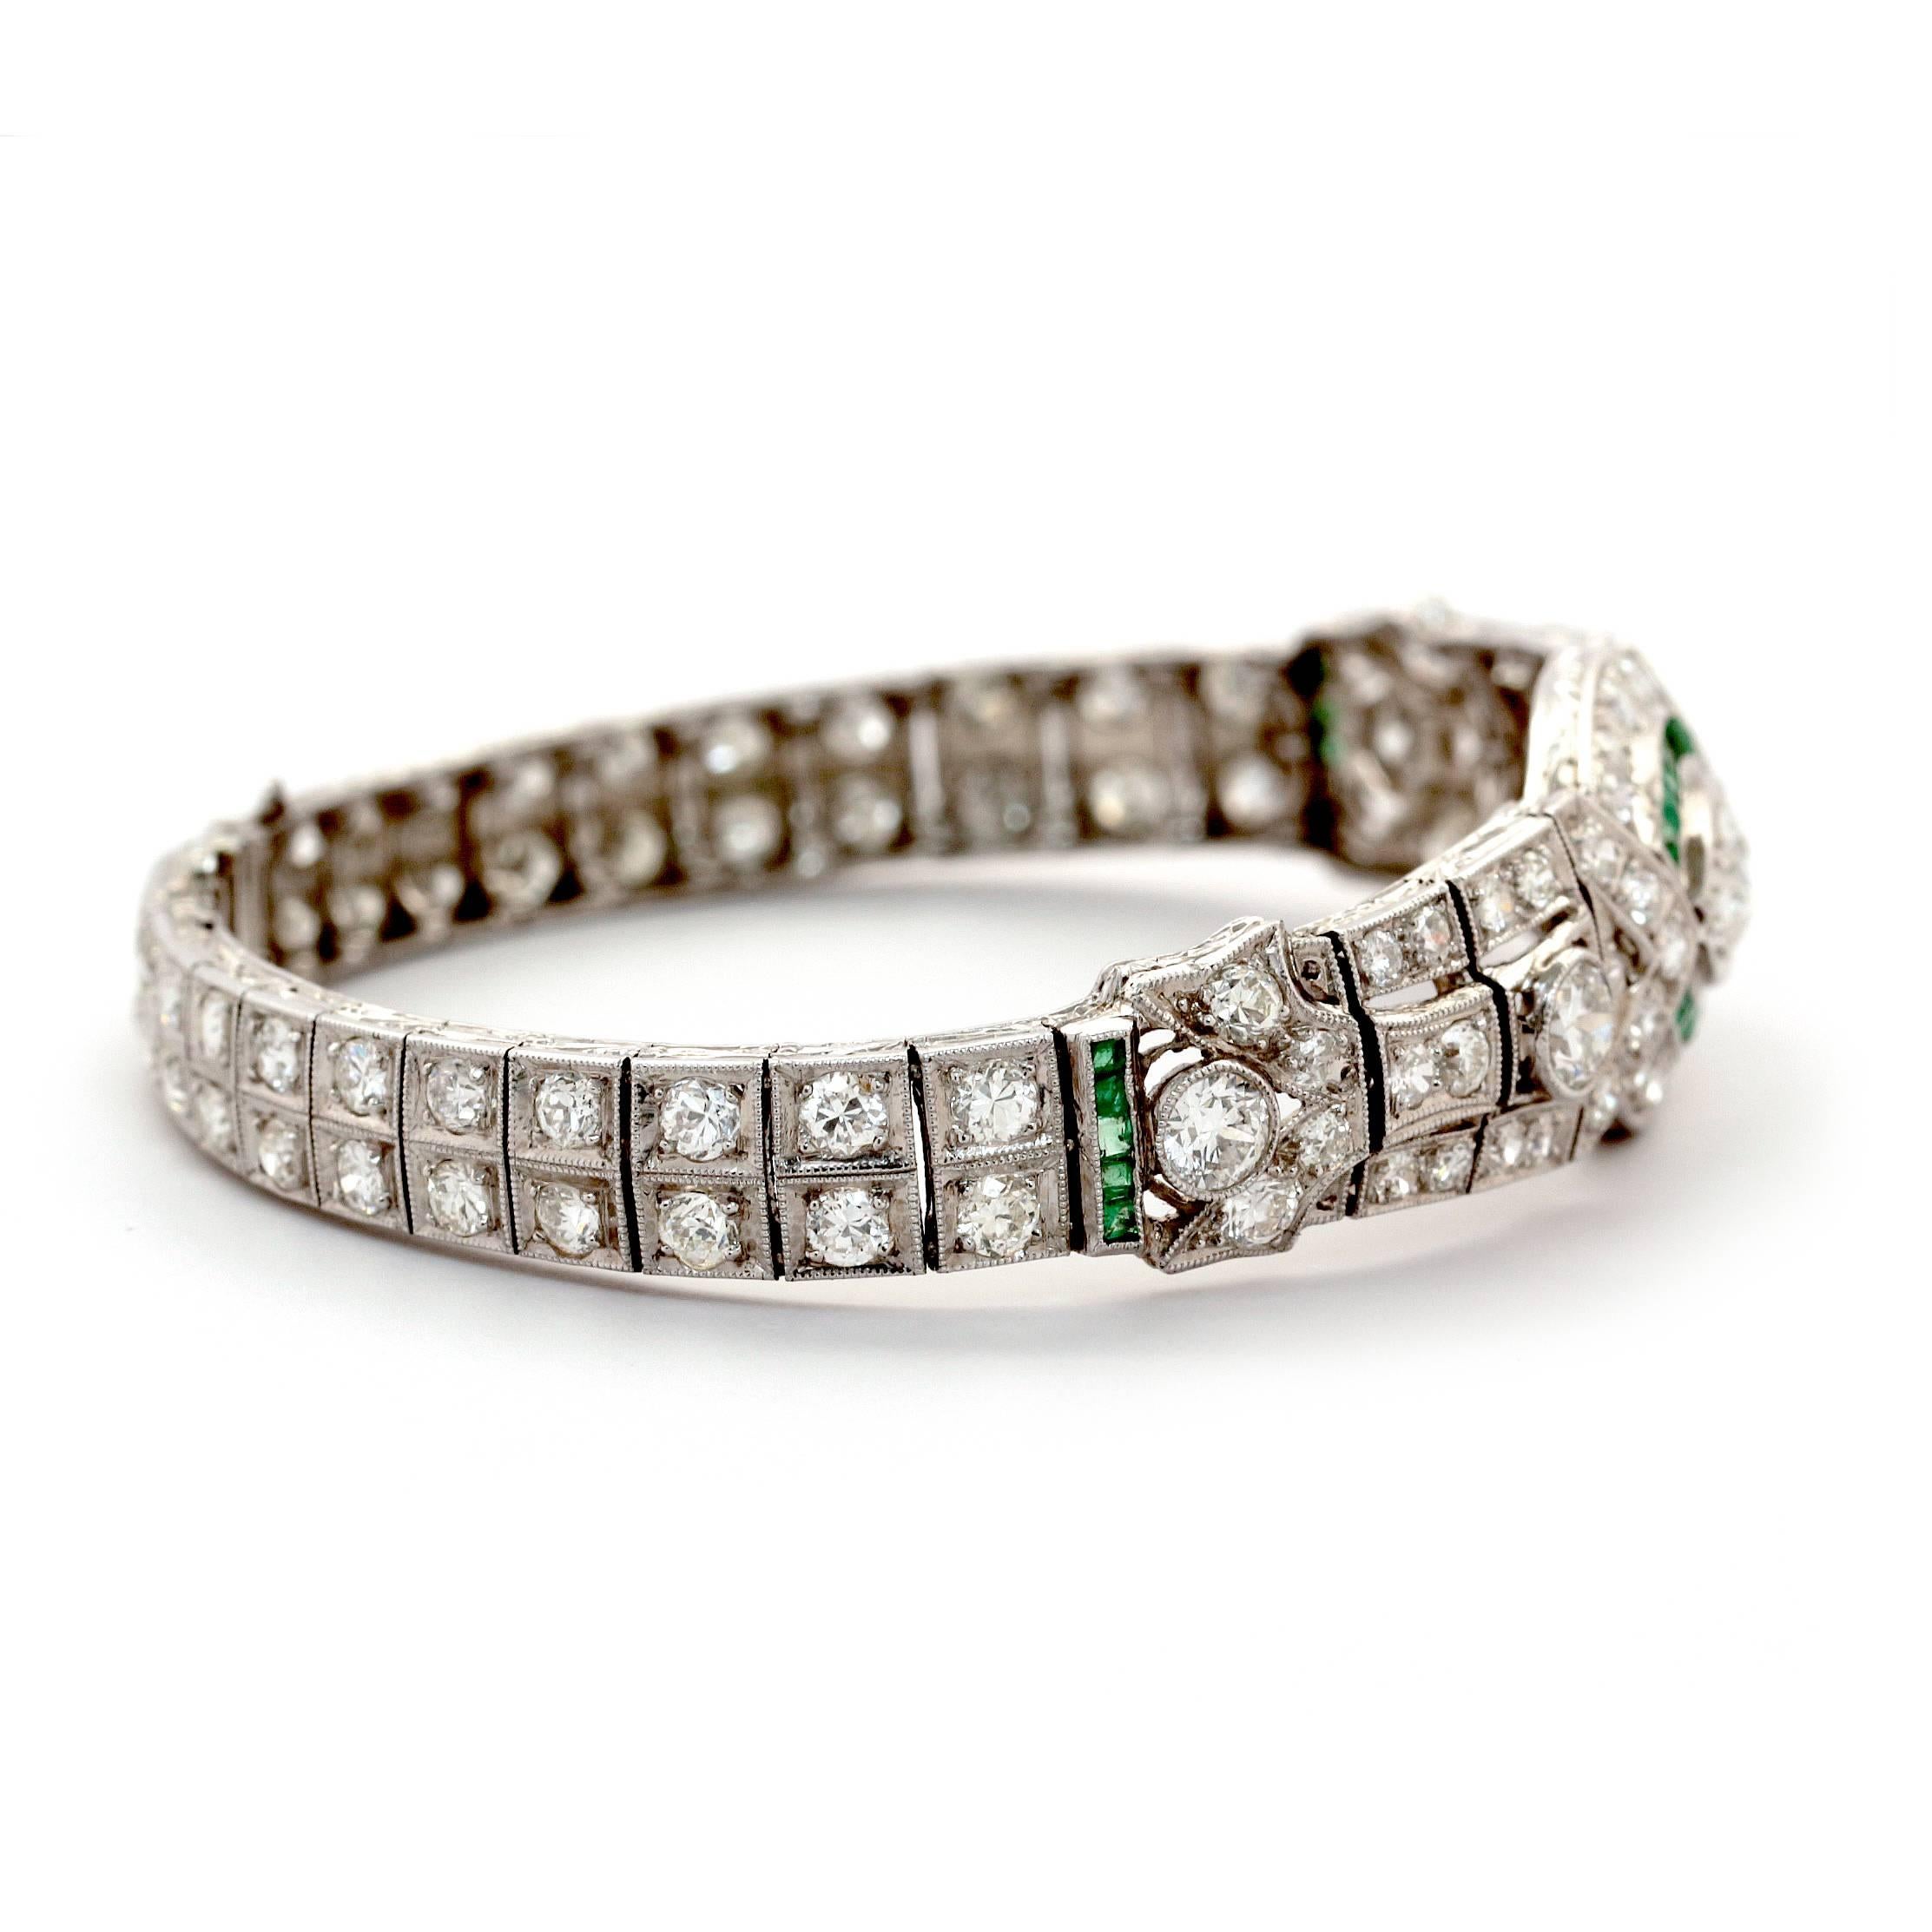 This stunning platinum Art Deco Bracelet has 62 round diamonds weighing approximately 5.50ct  and 28 square cut green Emeralds weighing approximately 10ct. 
beautiful details and articulated design.
Weights 15.9 grams.
It has a length of 17.9cm and